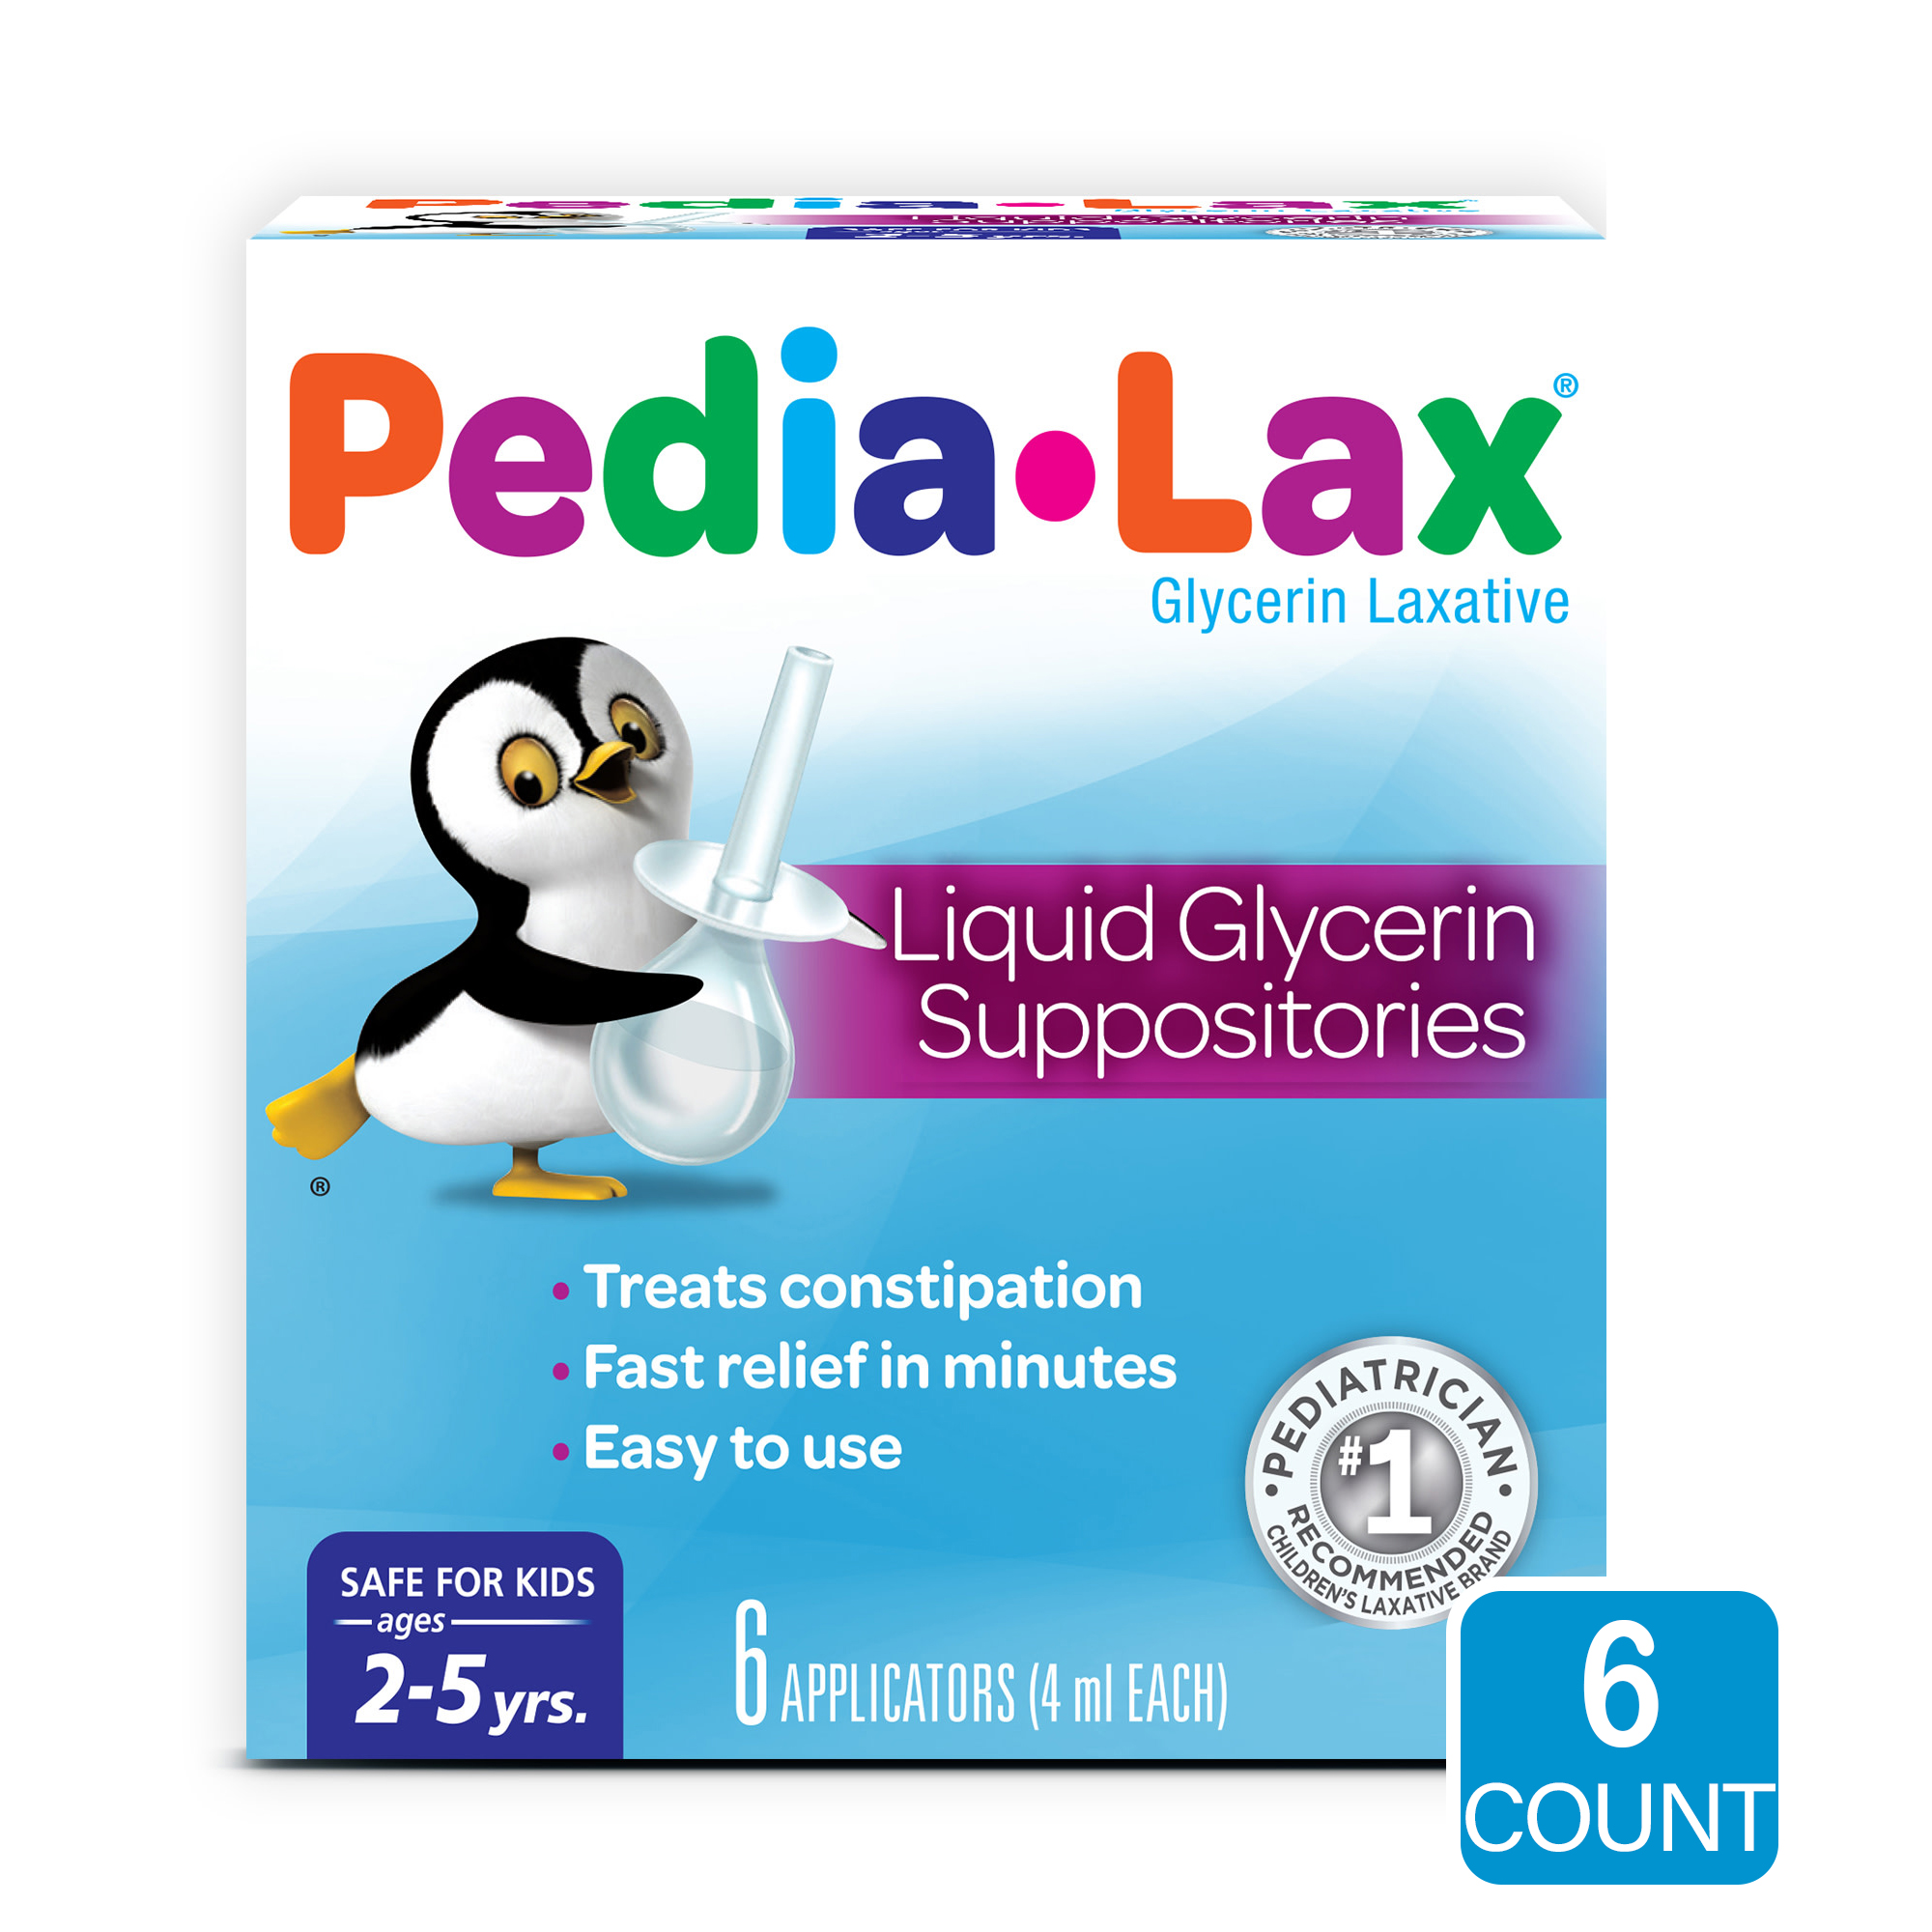 Pedia-Lax Laxative Liquid Glycerin Suppositories for Kids, Ages 2-5, 6 Count - image 1 of 17